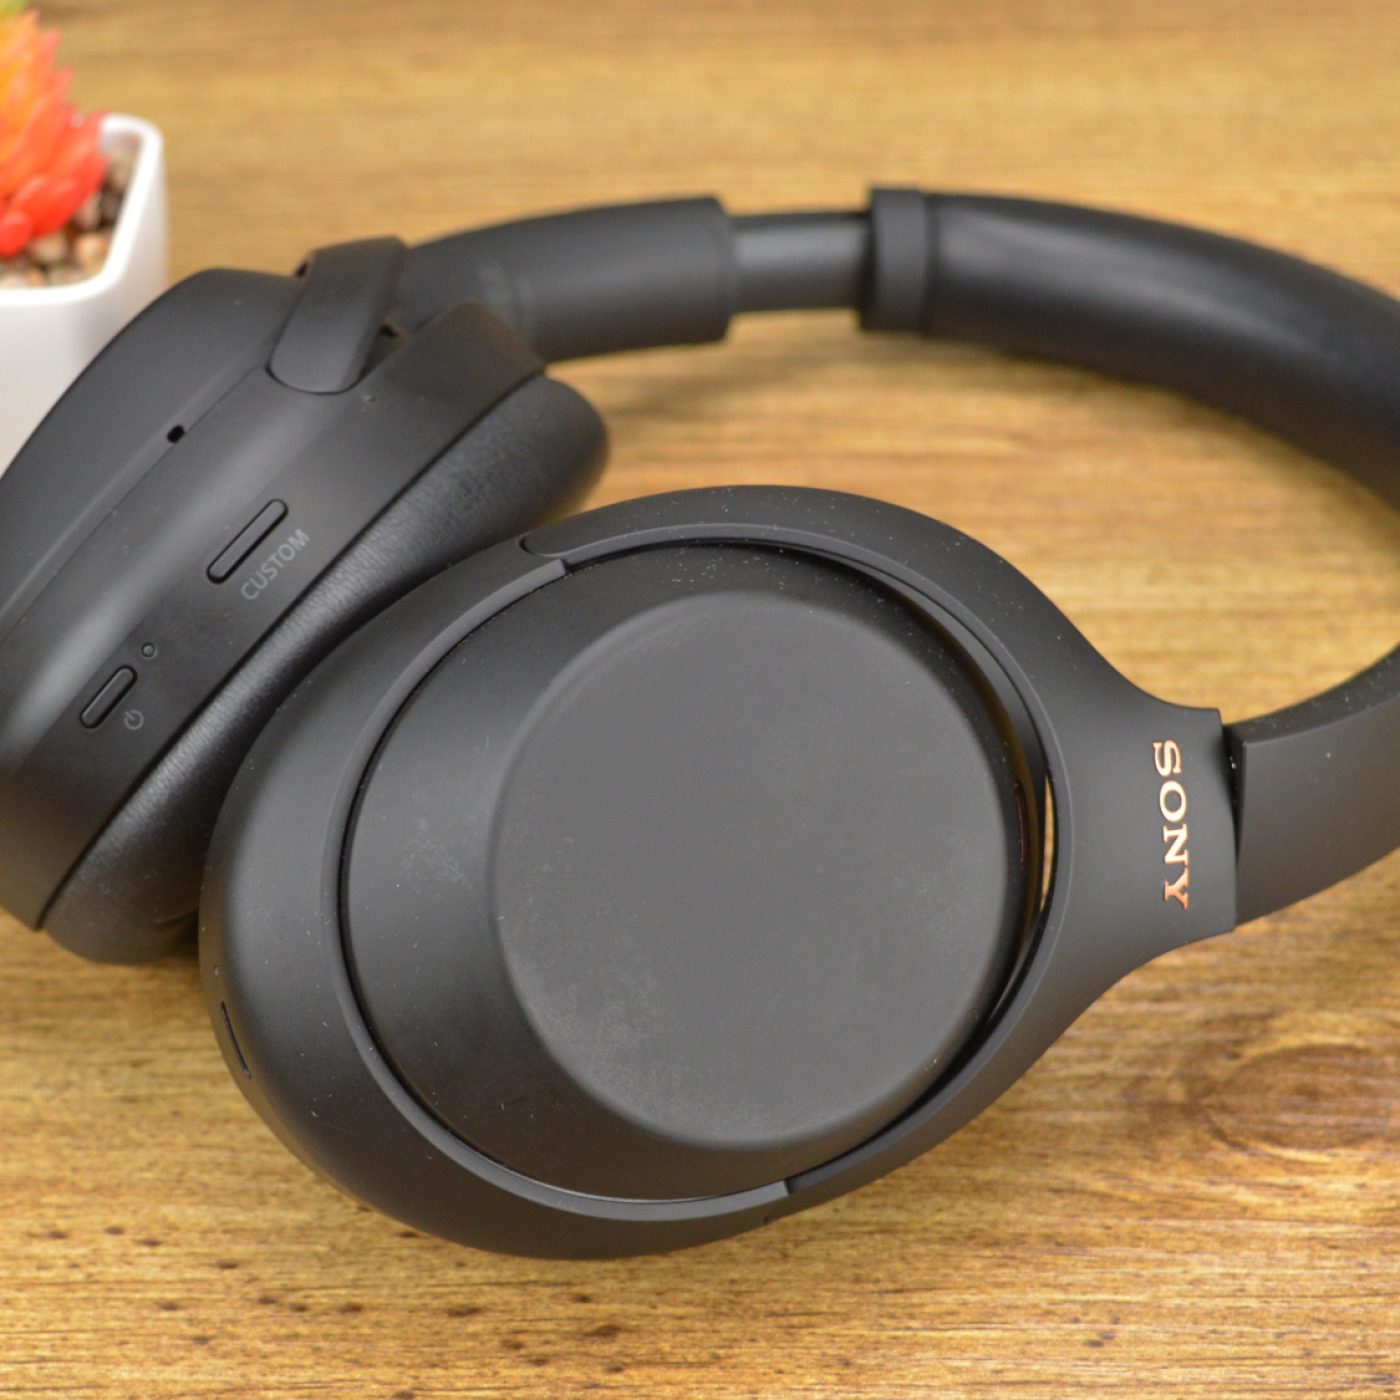 Sony WH-1000XM4 review: The best wireless noise cancelling headphones we've  ever tested